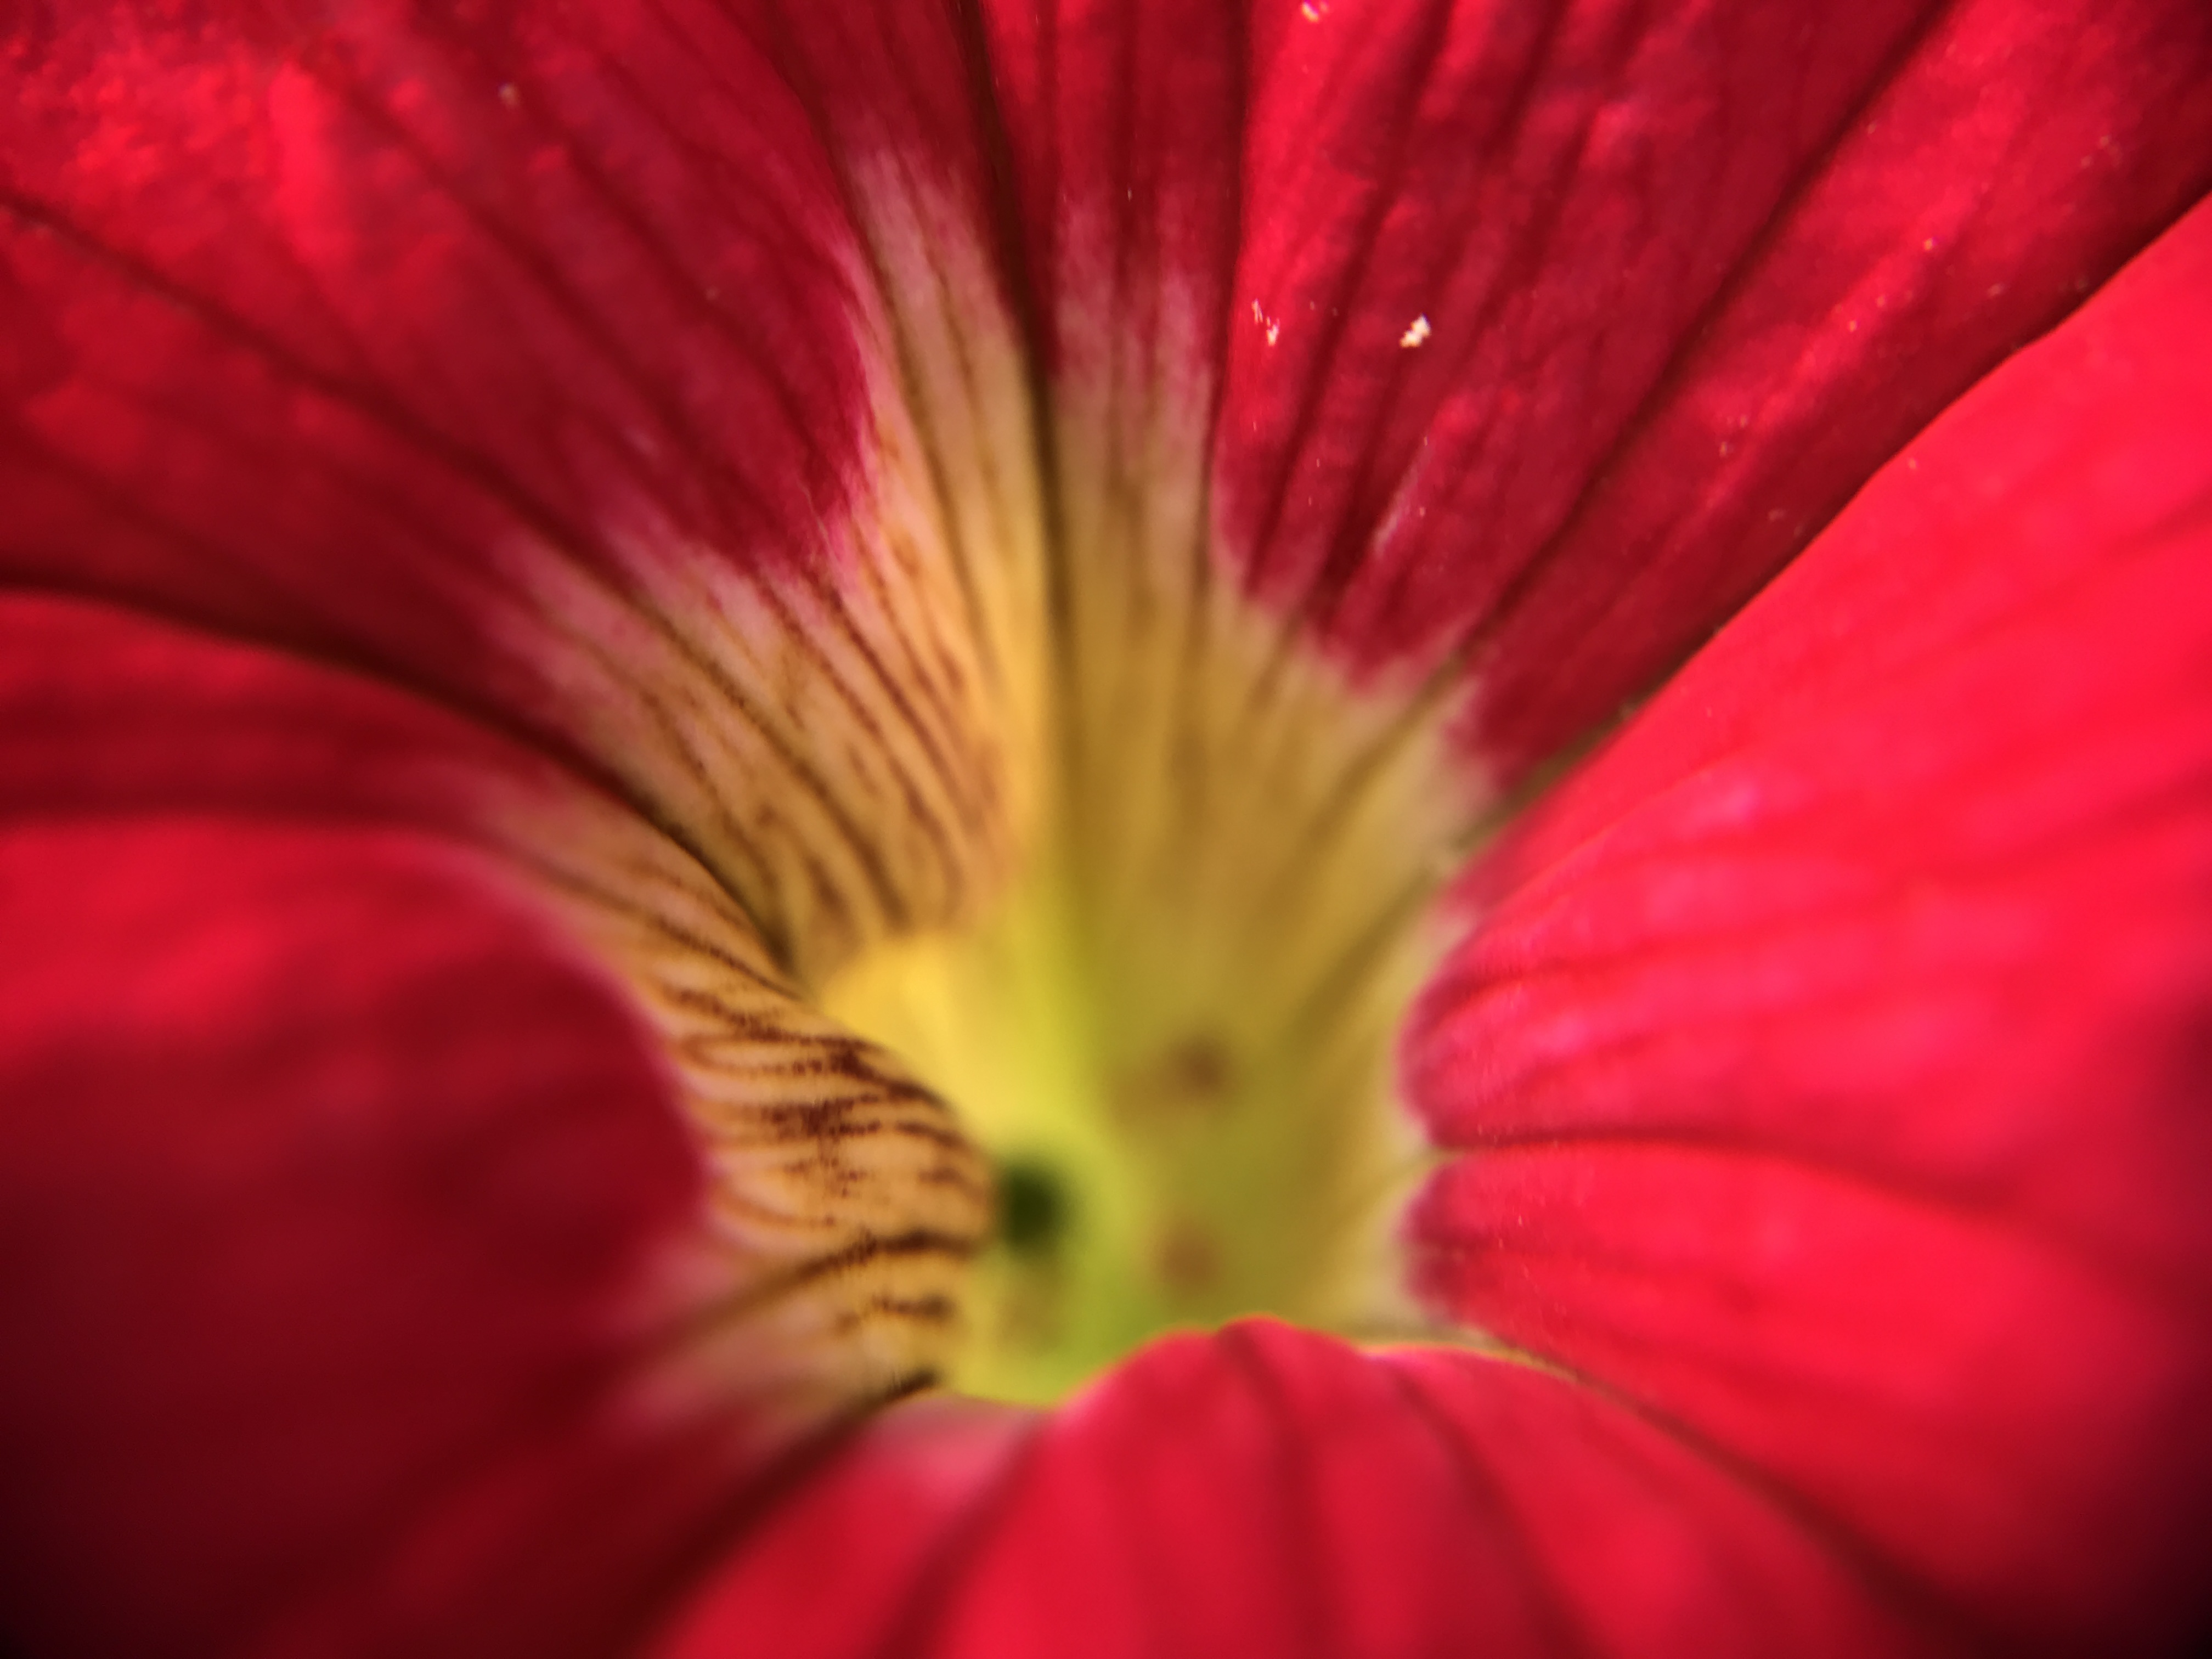 close up of a red flower with a yellow center